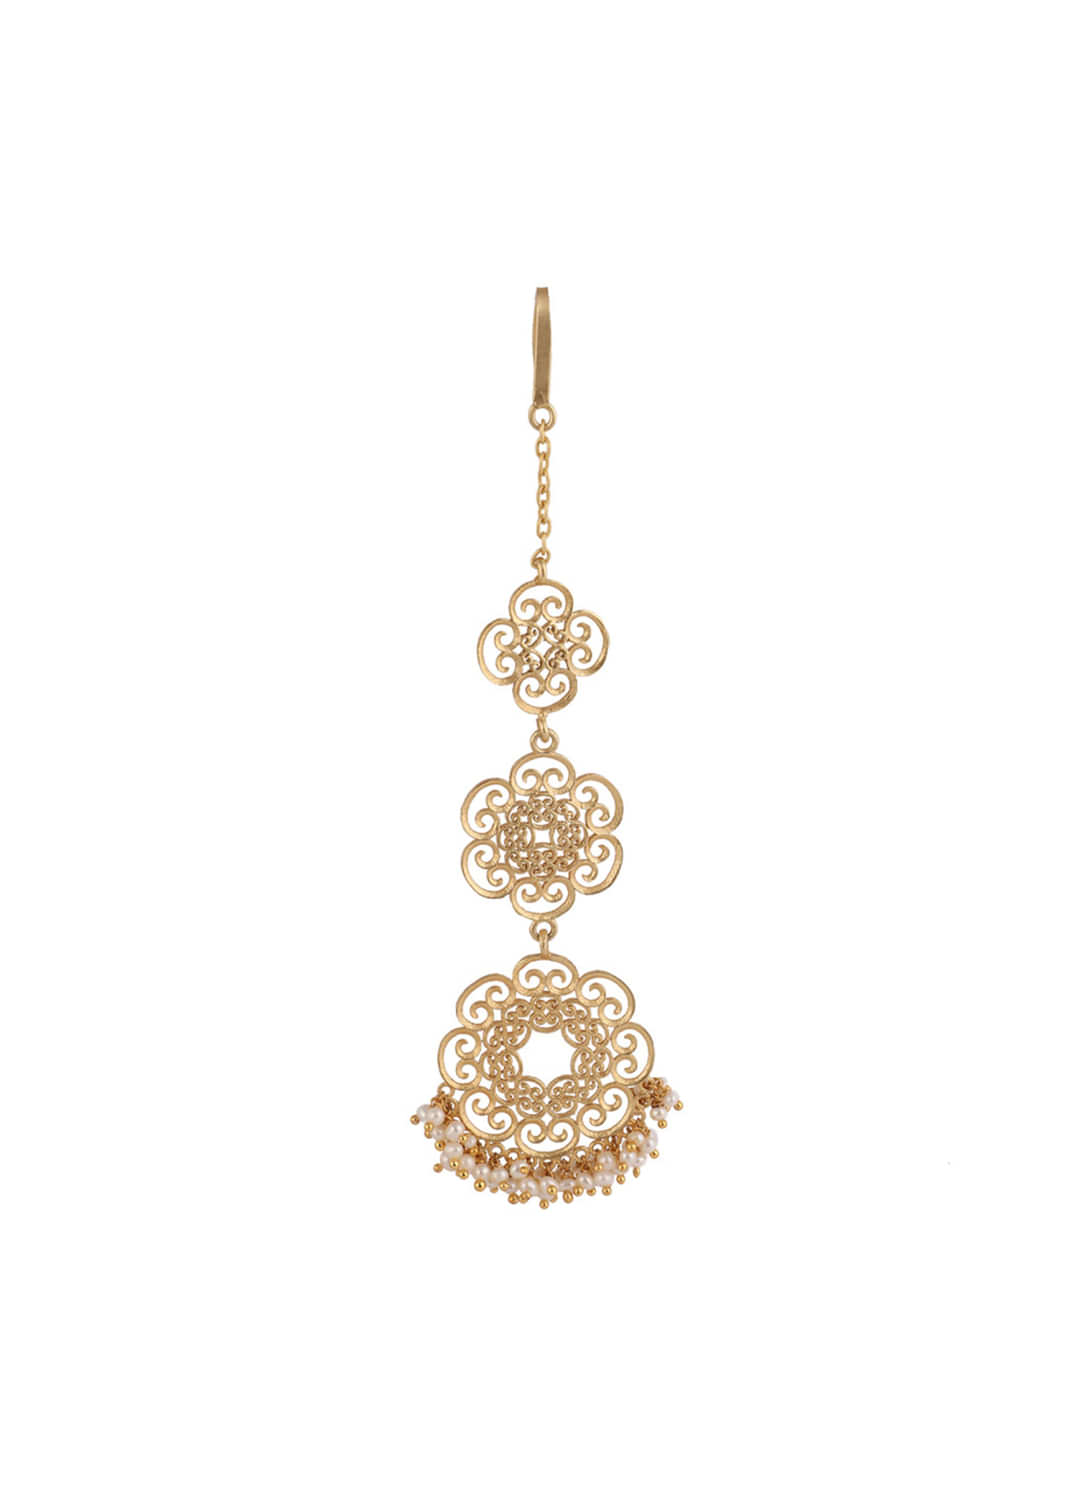 Gold Plated Maang Tika In Floral Motifs With Delicate Filigree Design And Pearls By Zariin